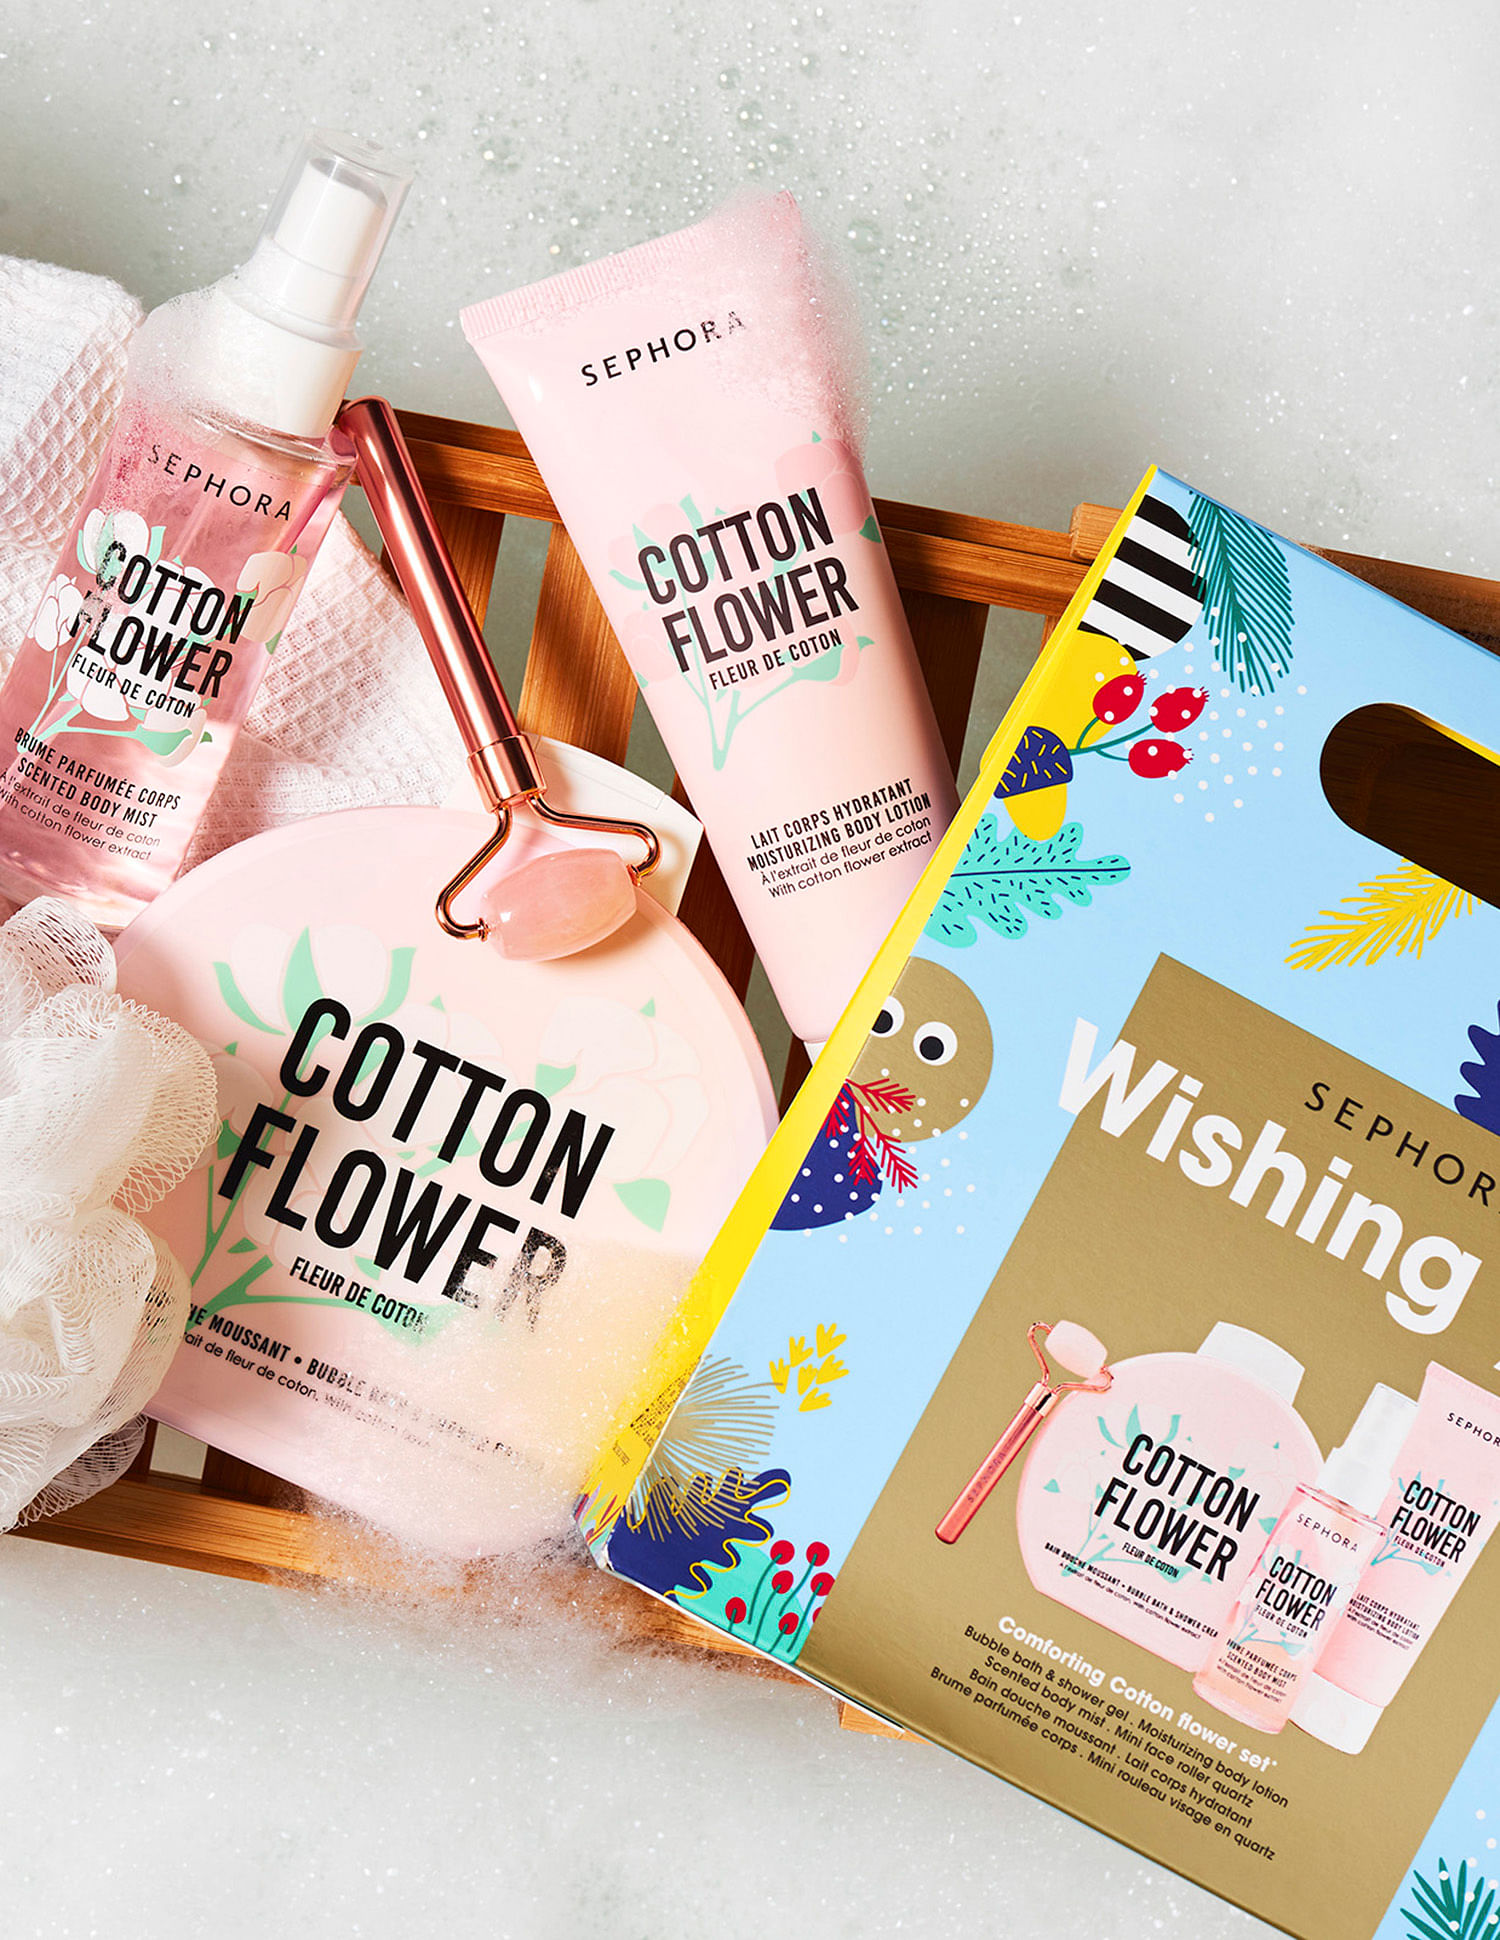 Buy Sephora Collection Wishing You Comforting Cotton Flower Set (Limited  Edition) - NNNOW.com